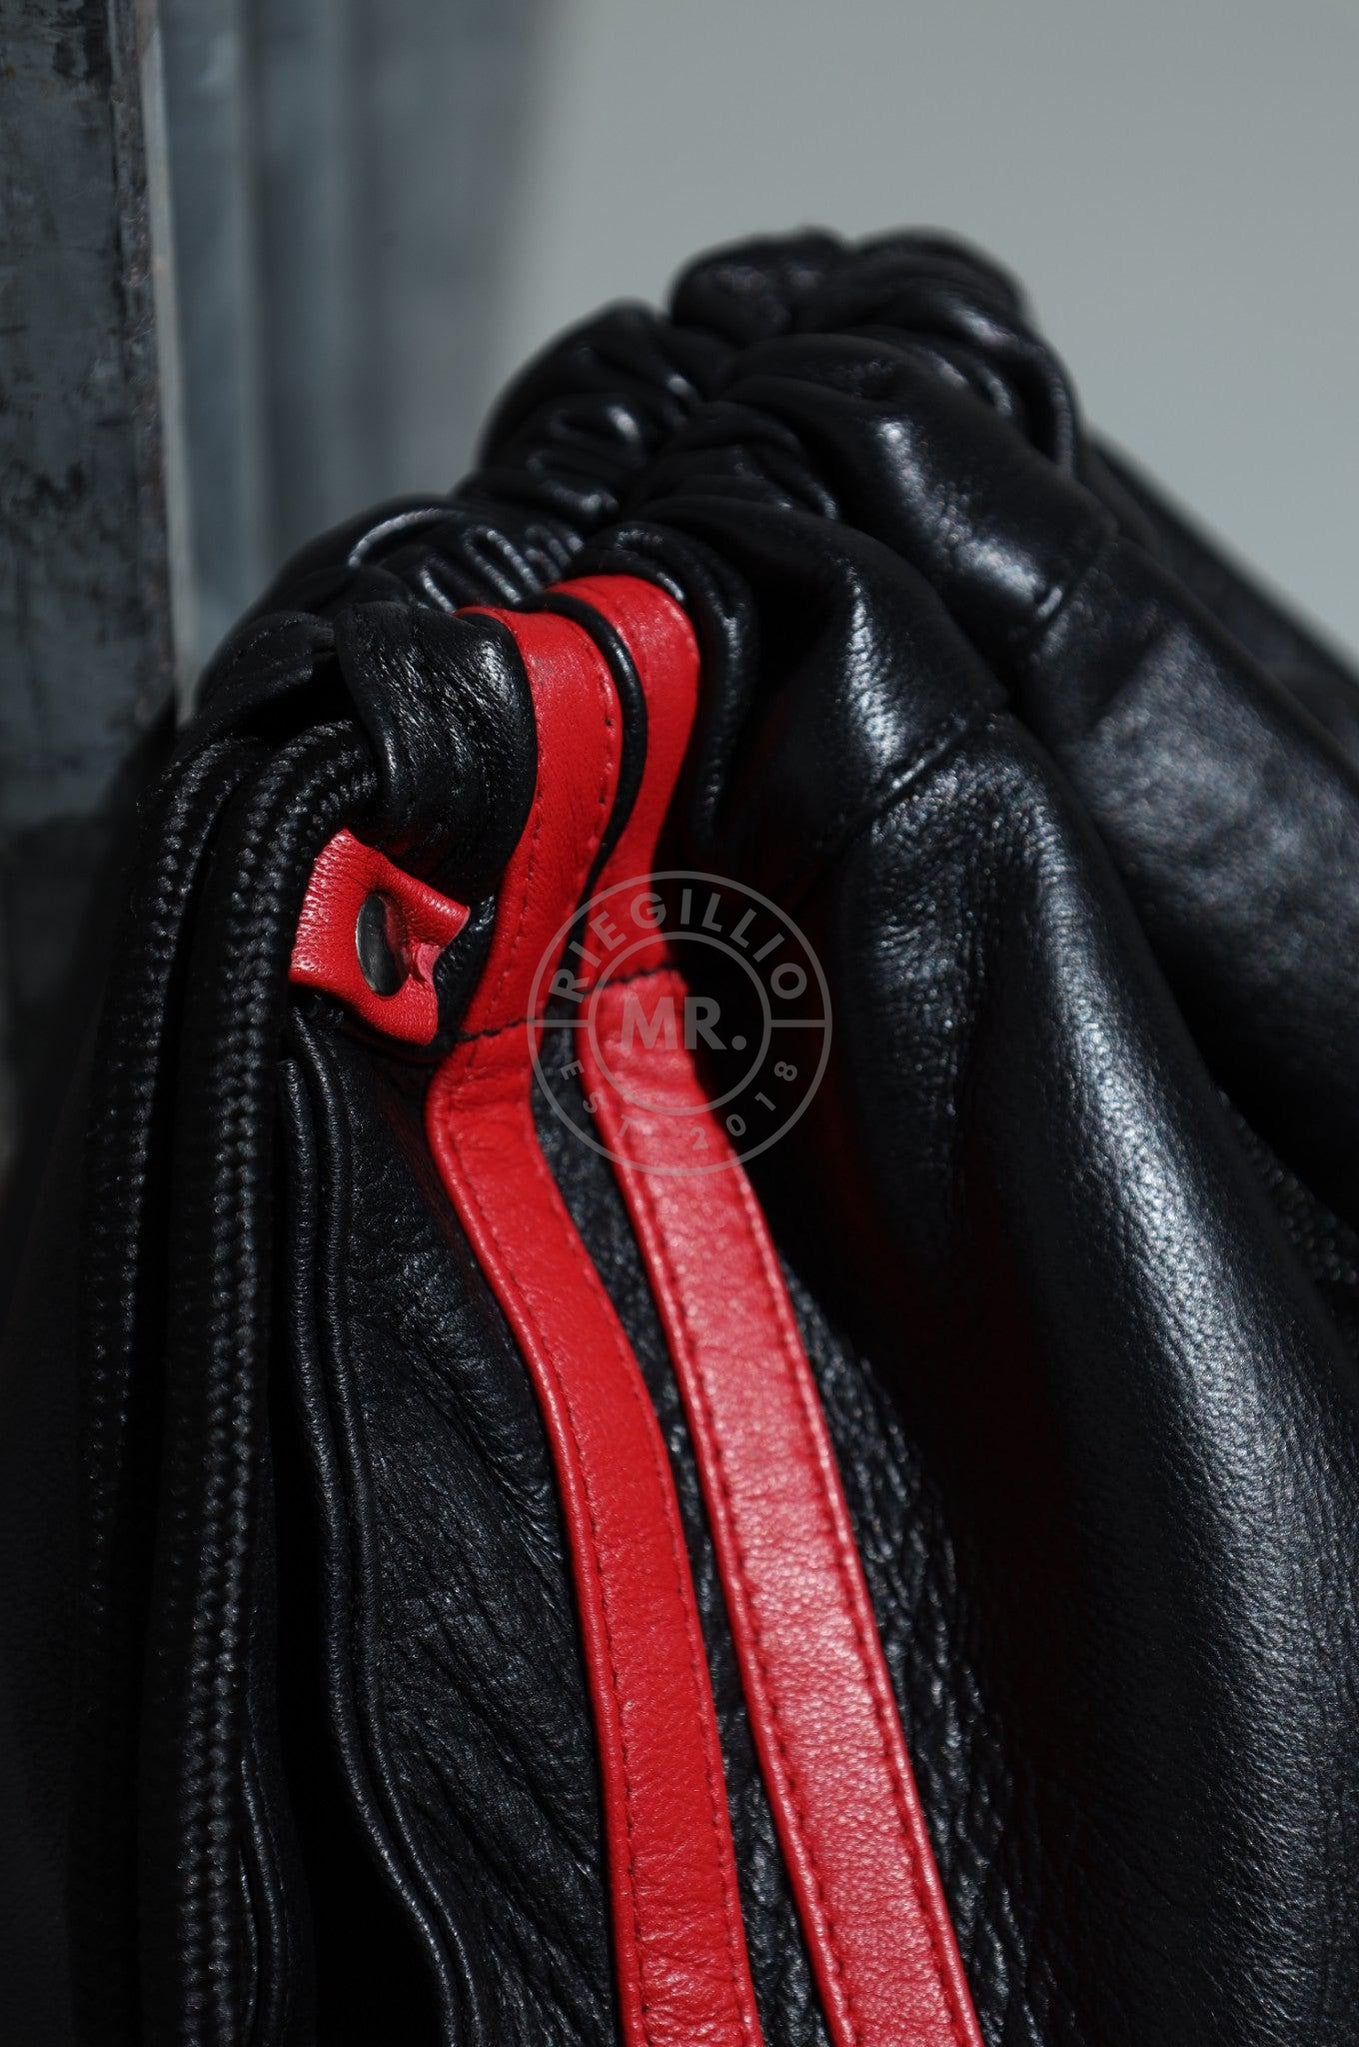 Leather Backpack Black - Red Stripes-at MR. Riegillio